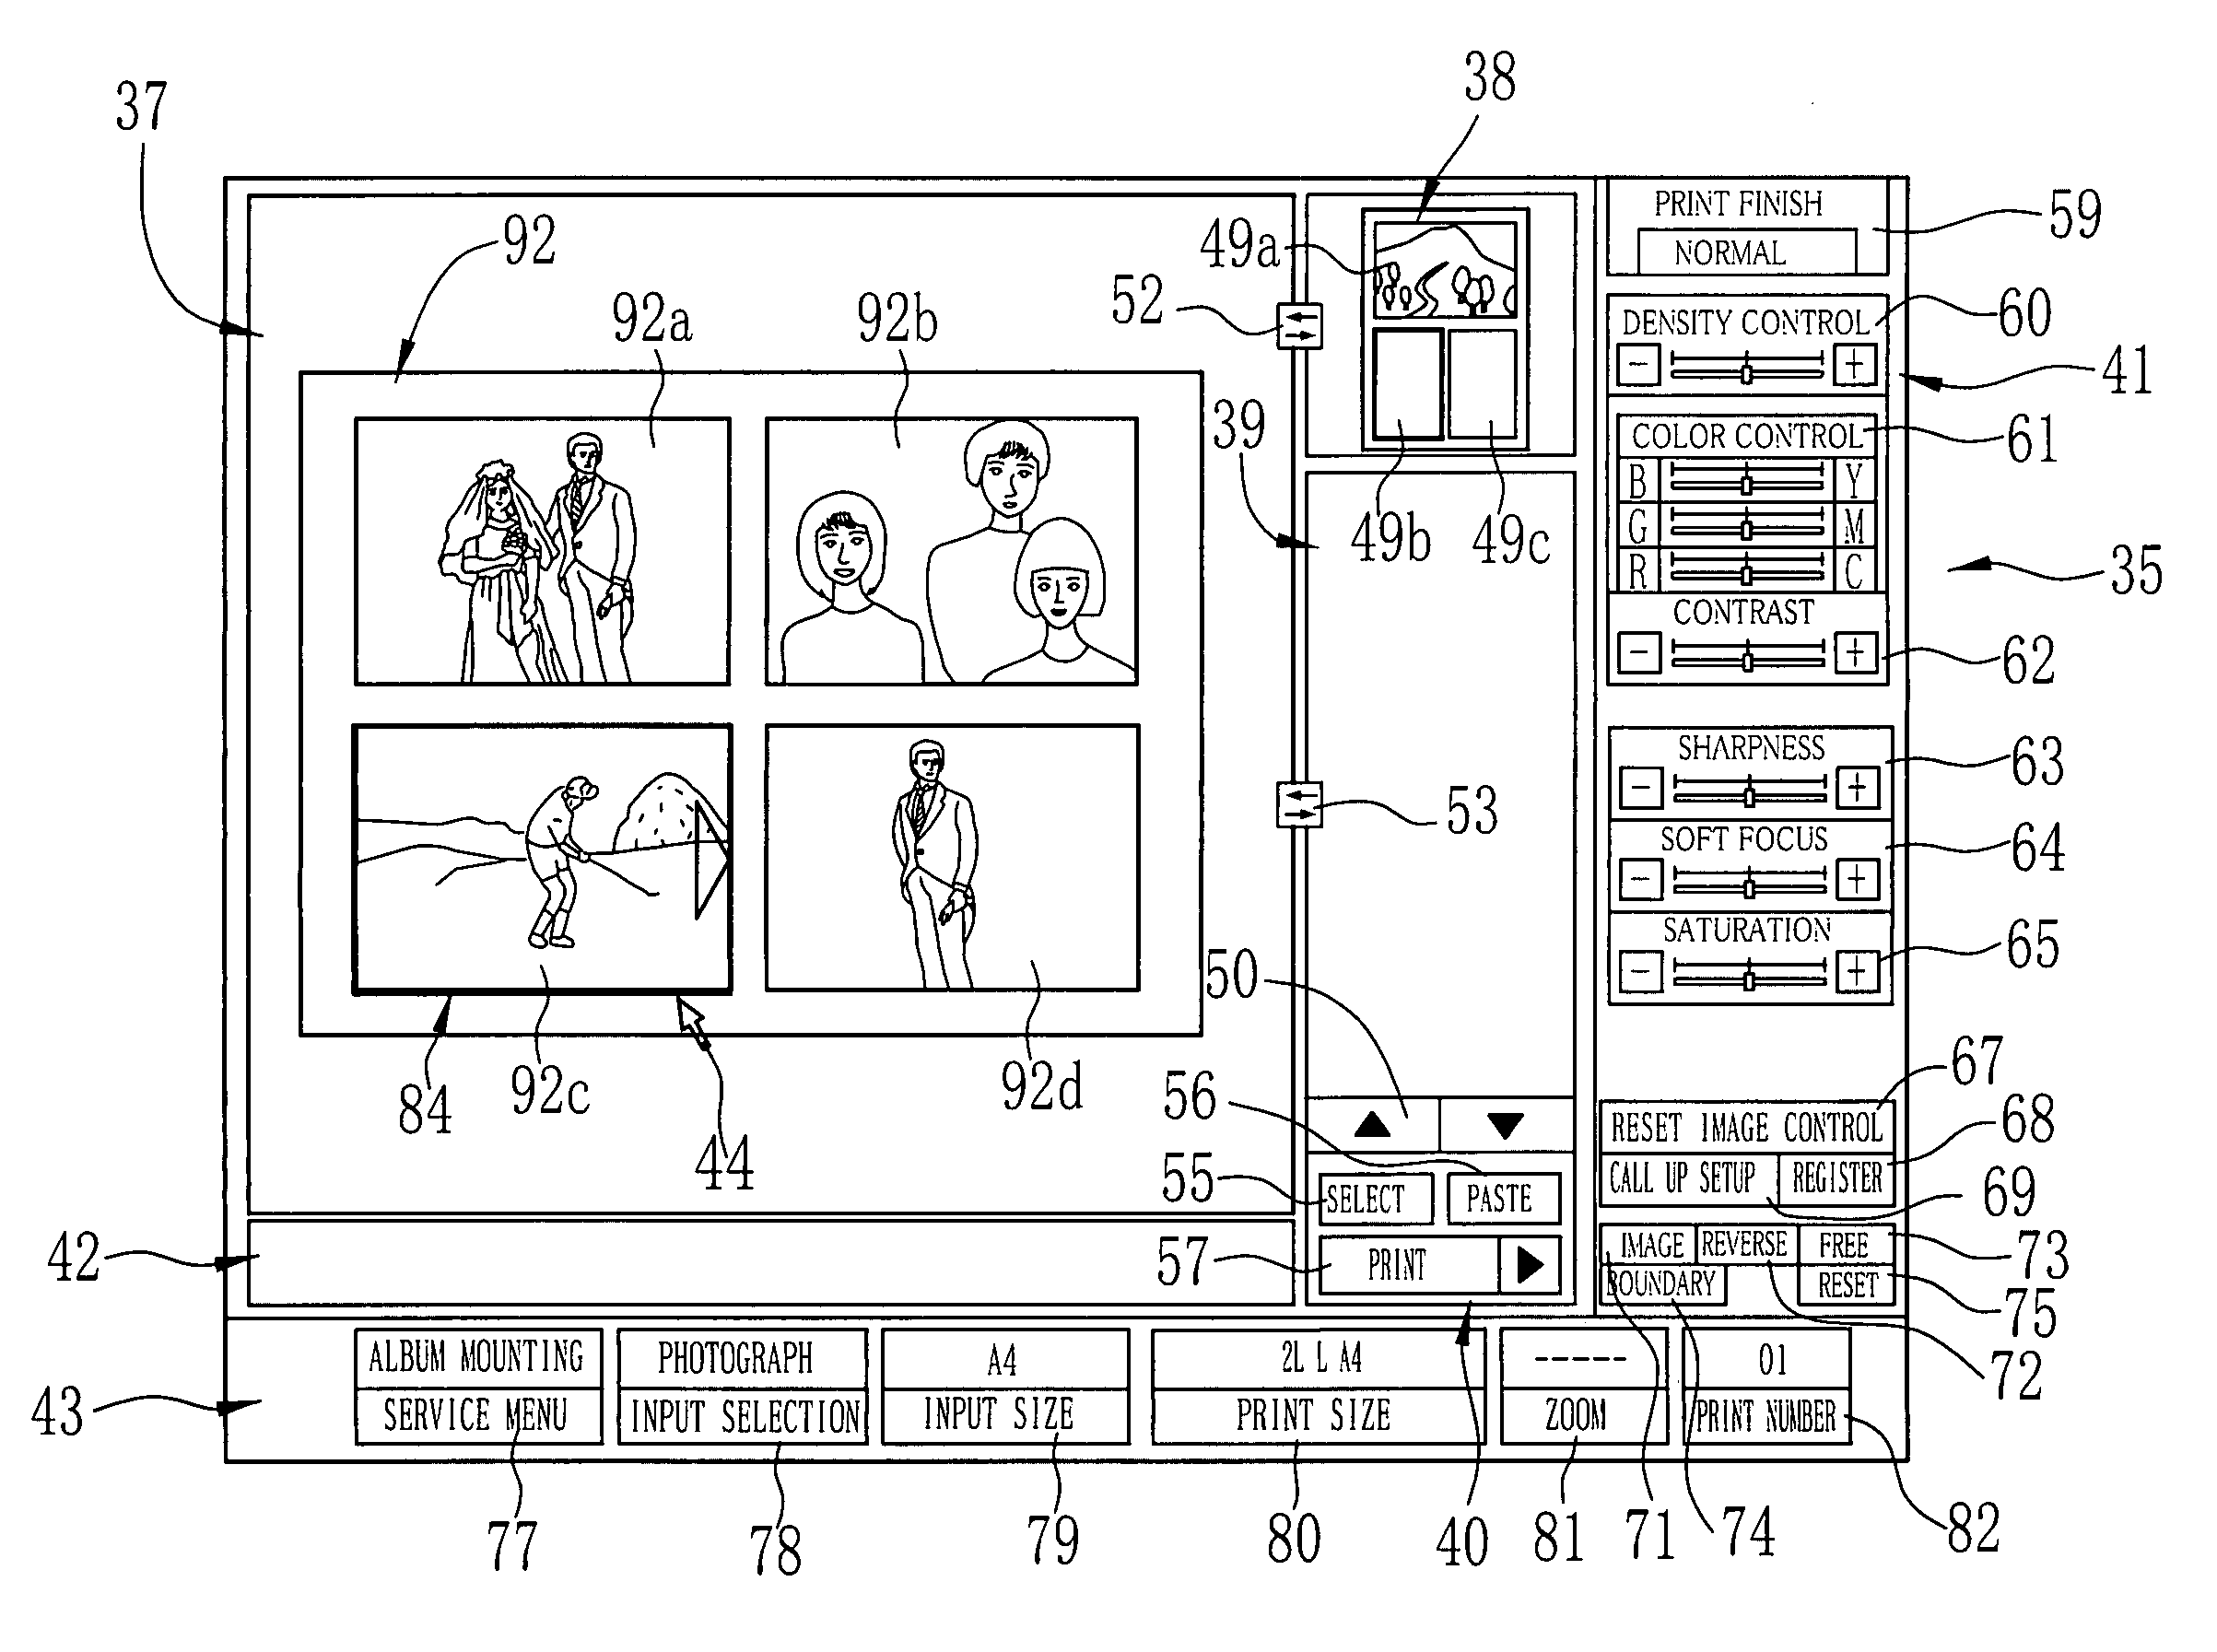 Imaging system for automatic resolution adjustment